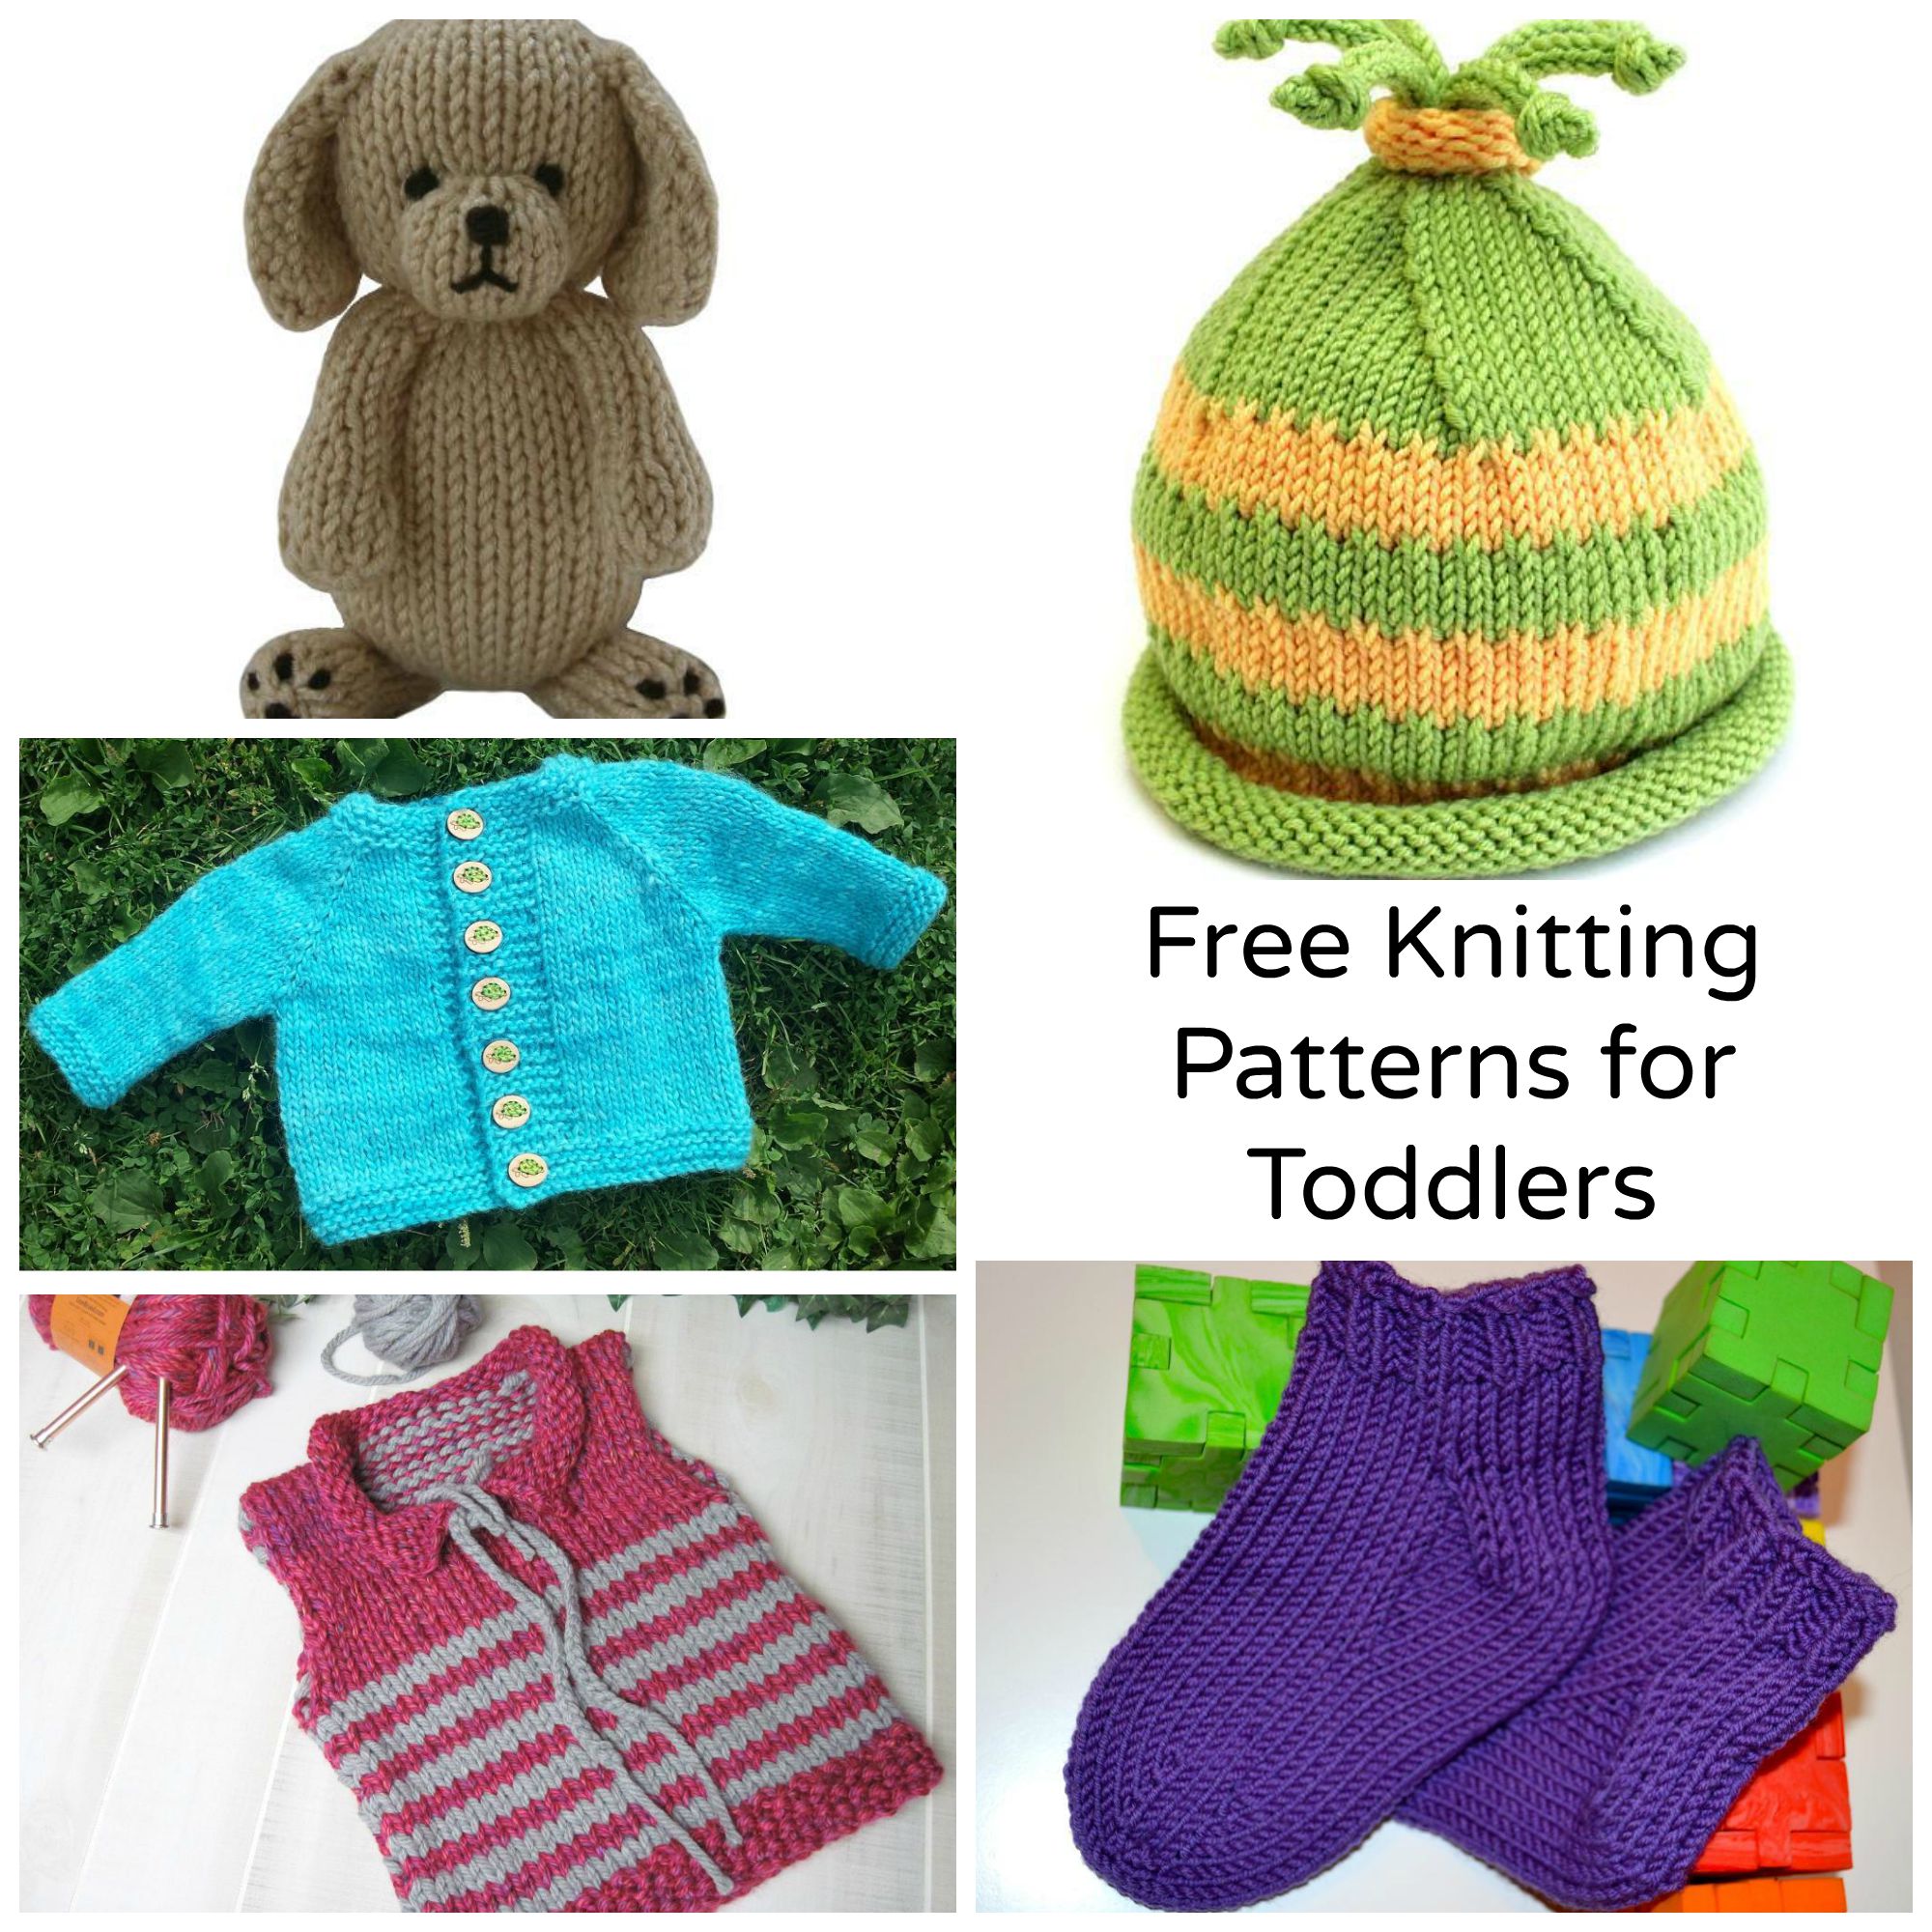 Free Knitting Patterns for Toddlers